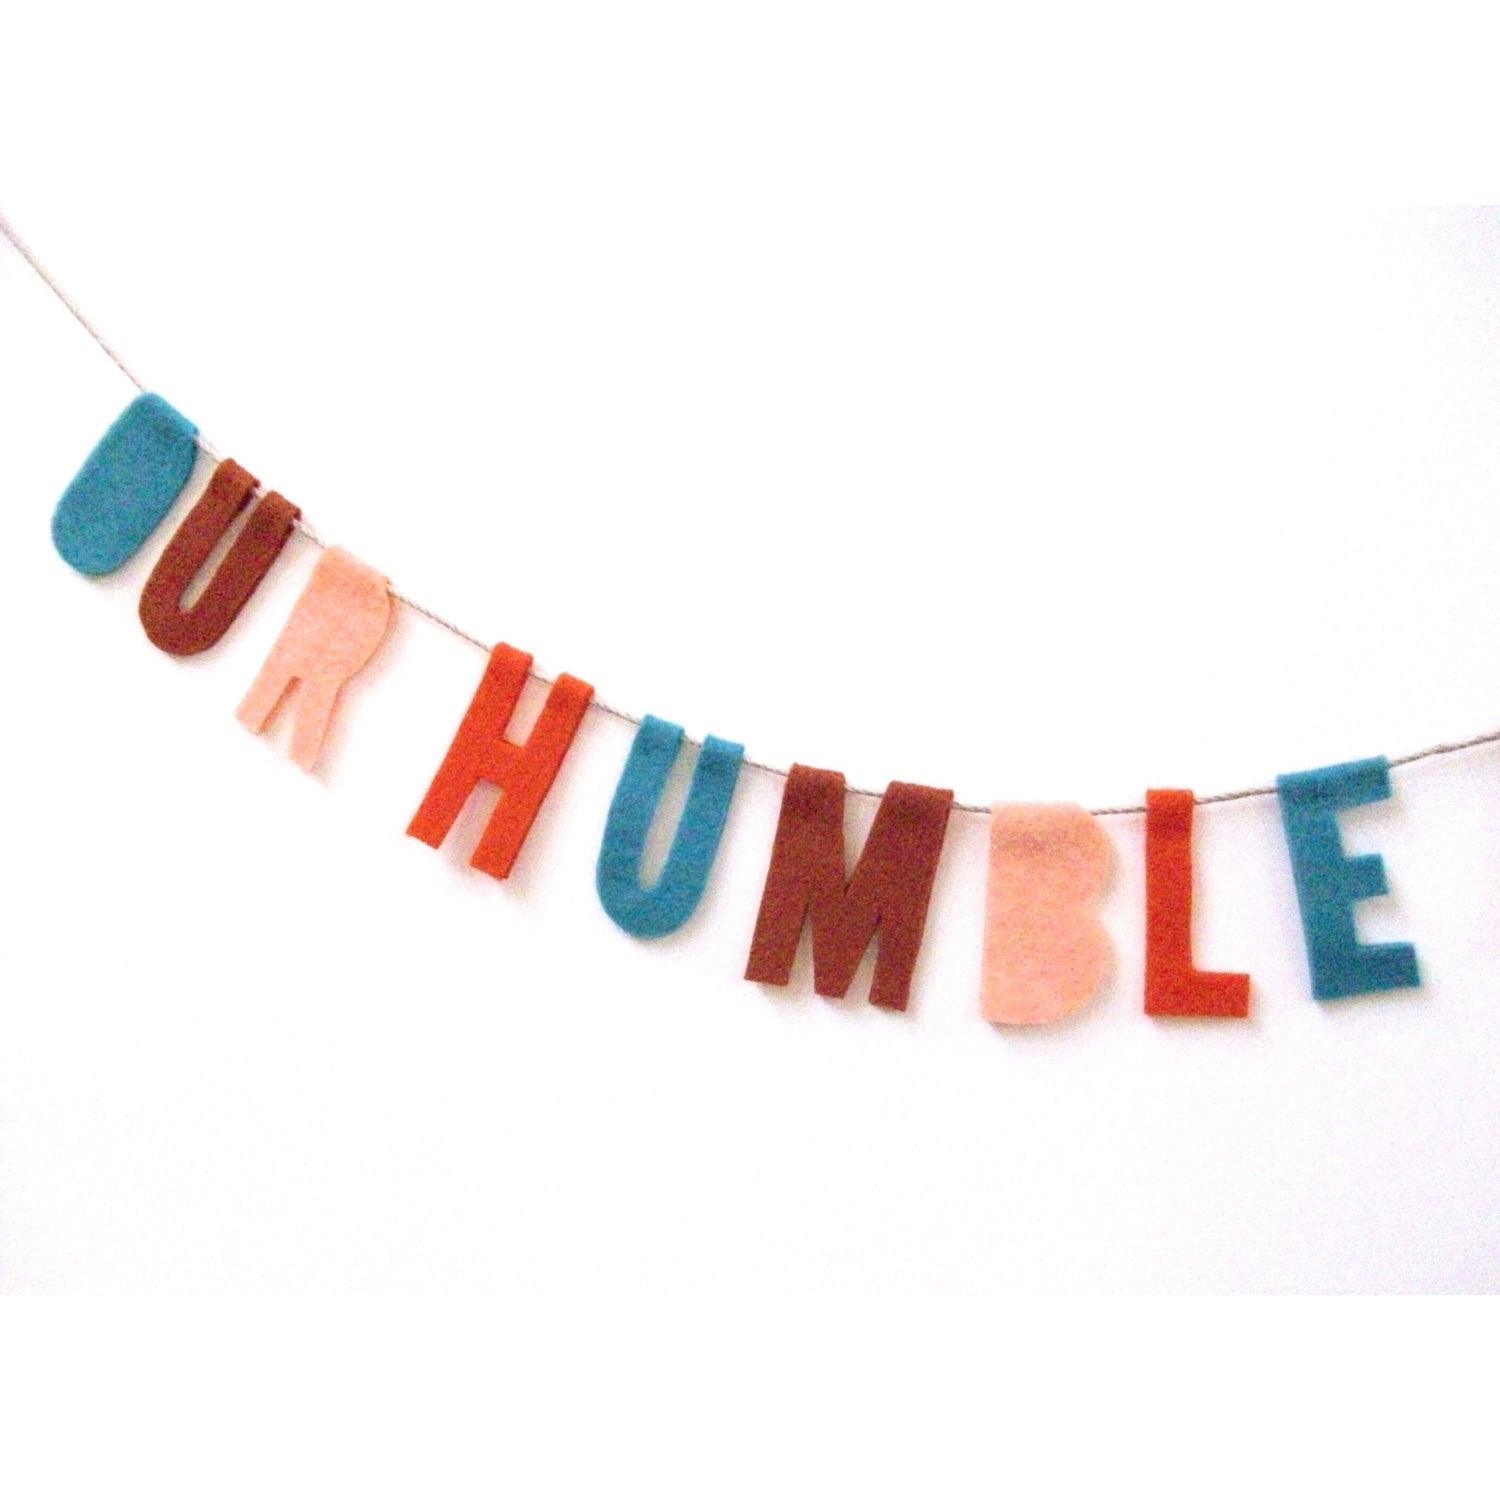 Handmade Felted Our Humble Abode Banner in Multicolor | Housewarming or Party Garland